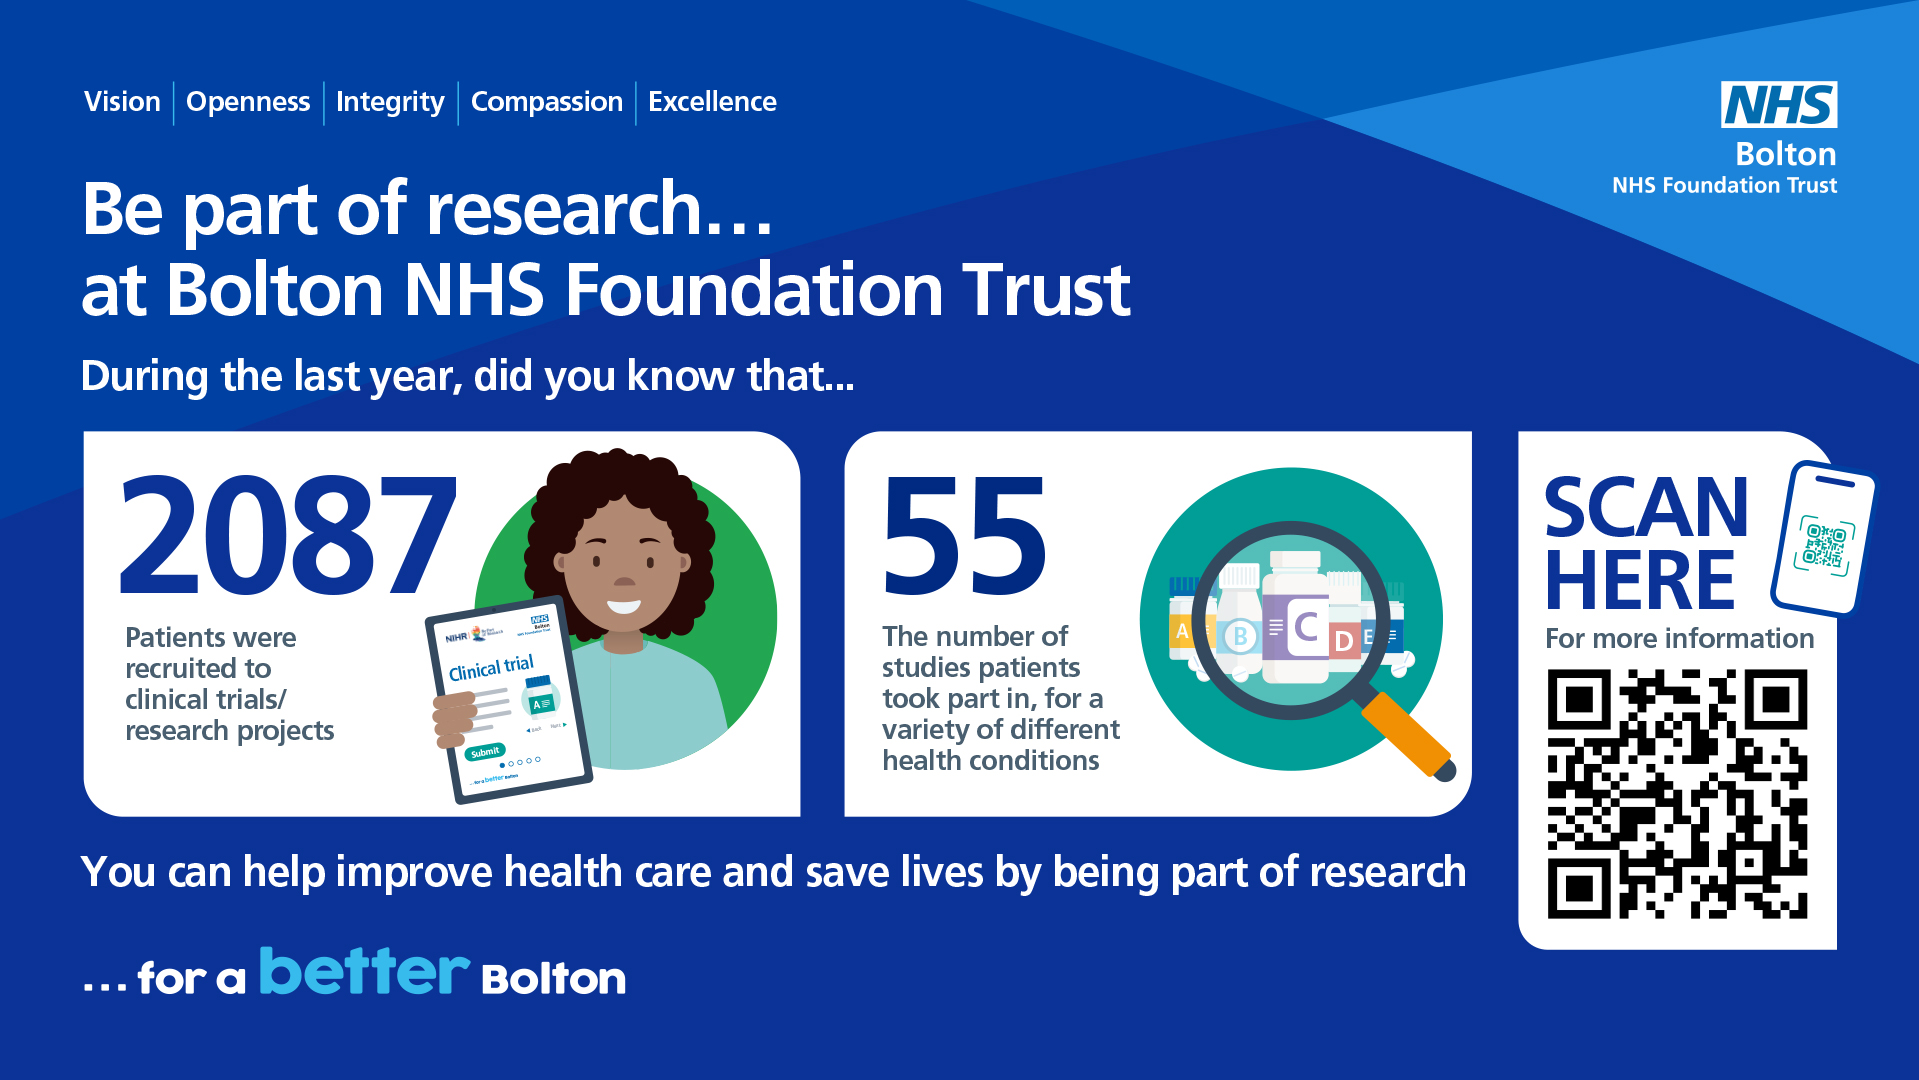 Be part of research at Bolton NHS Foundation Trust graphic